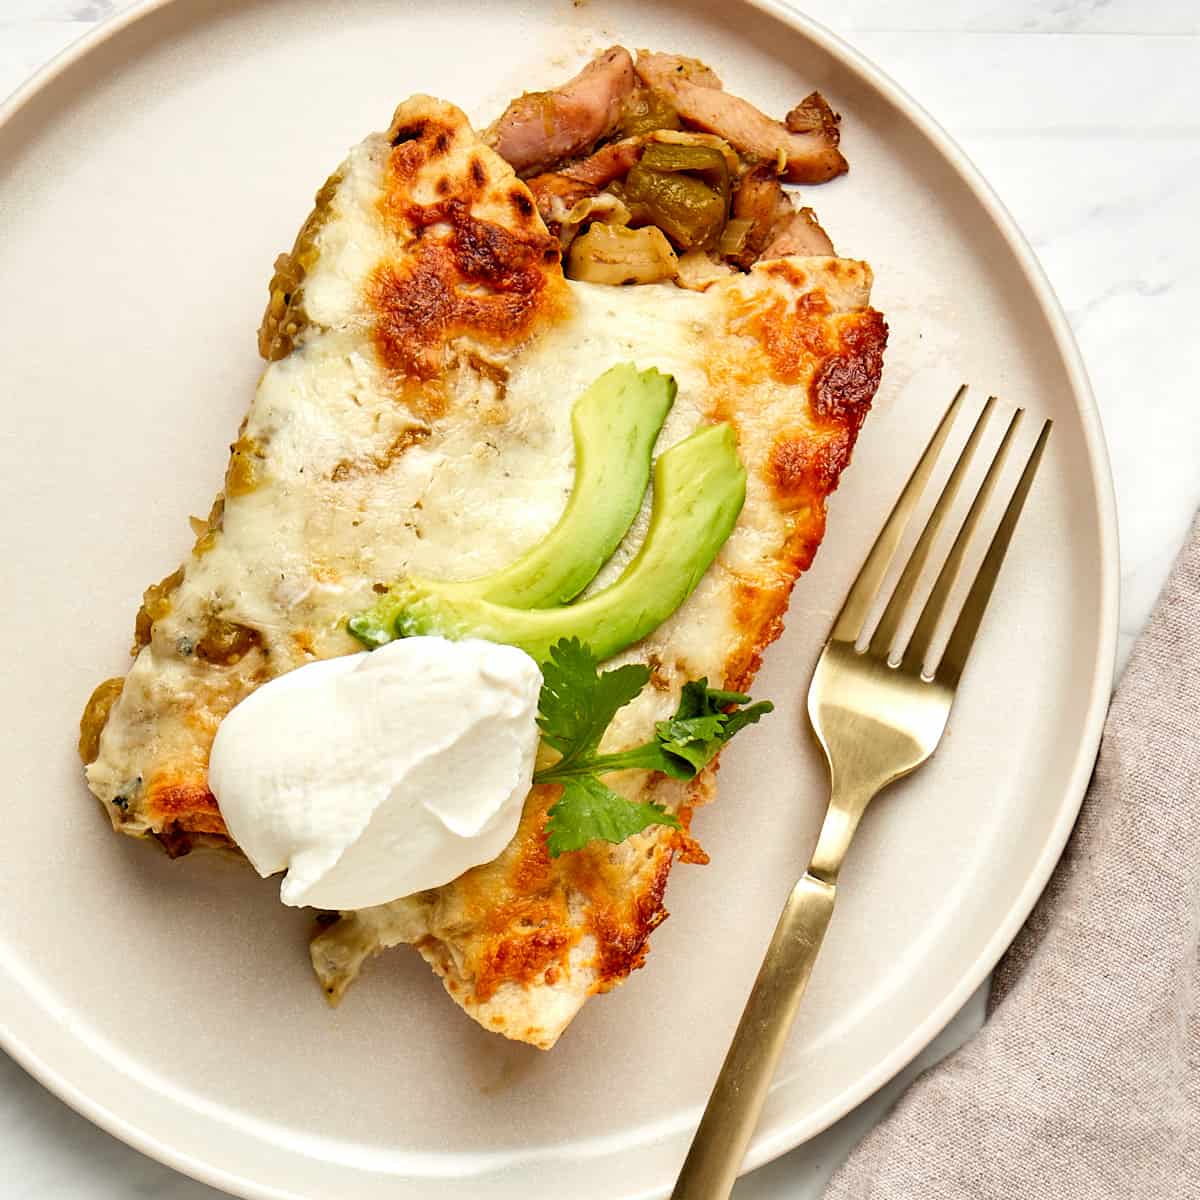 two cooked enchiladas on a plate topped with avocado slices and sour cream